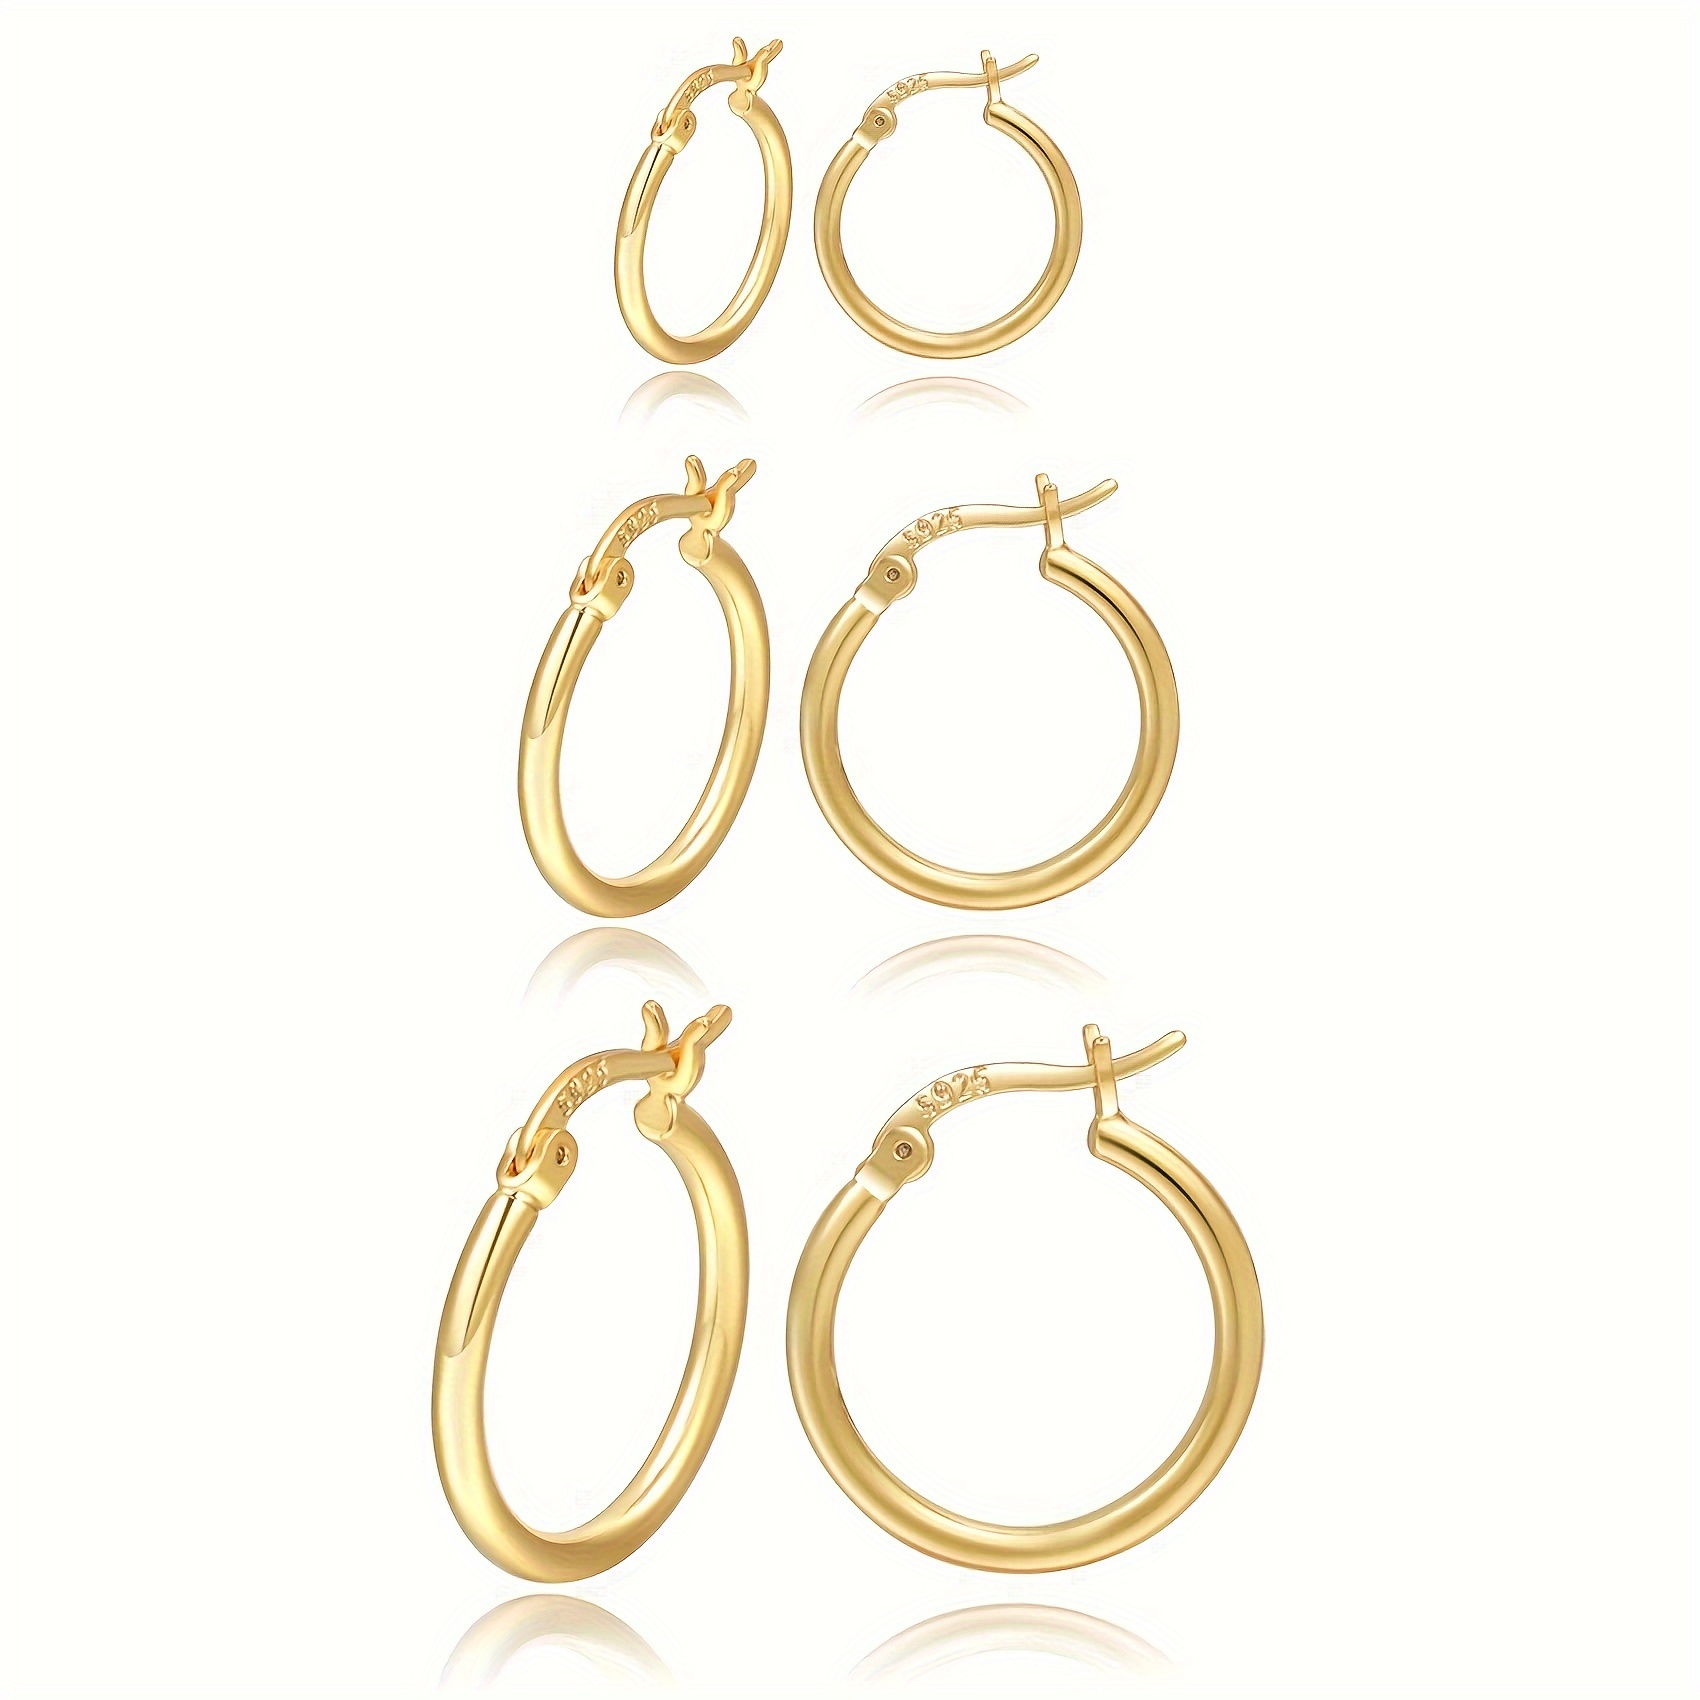 

Simply & Classic Style, 925 Sterling Silvery Hoop Earrings, Golden & Silvery Finish Tone Studs, Fashion Elegant Accessory For Daily Wear, Idea Gift, 13/15/20 Mm